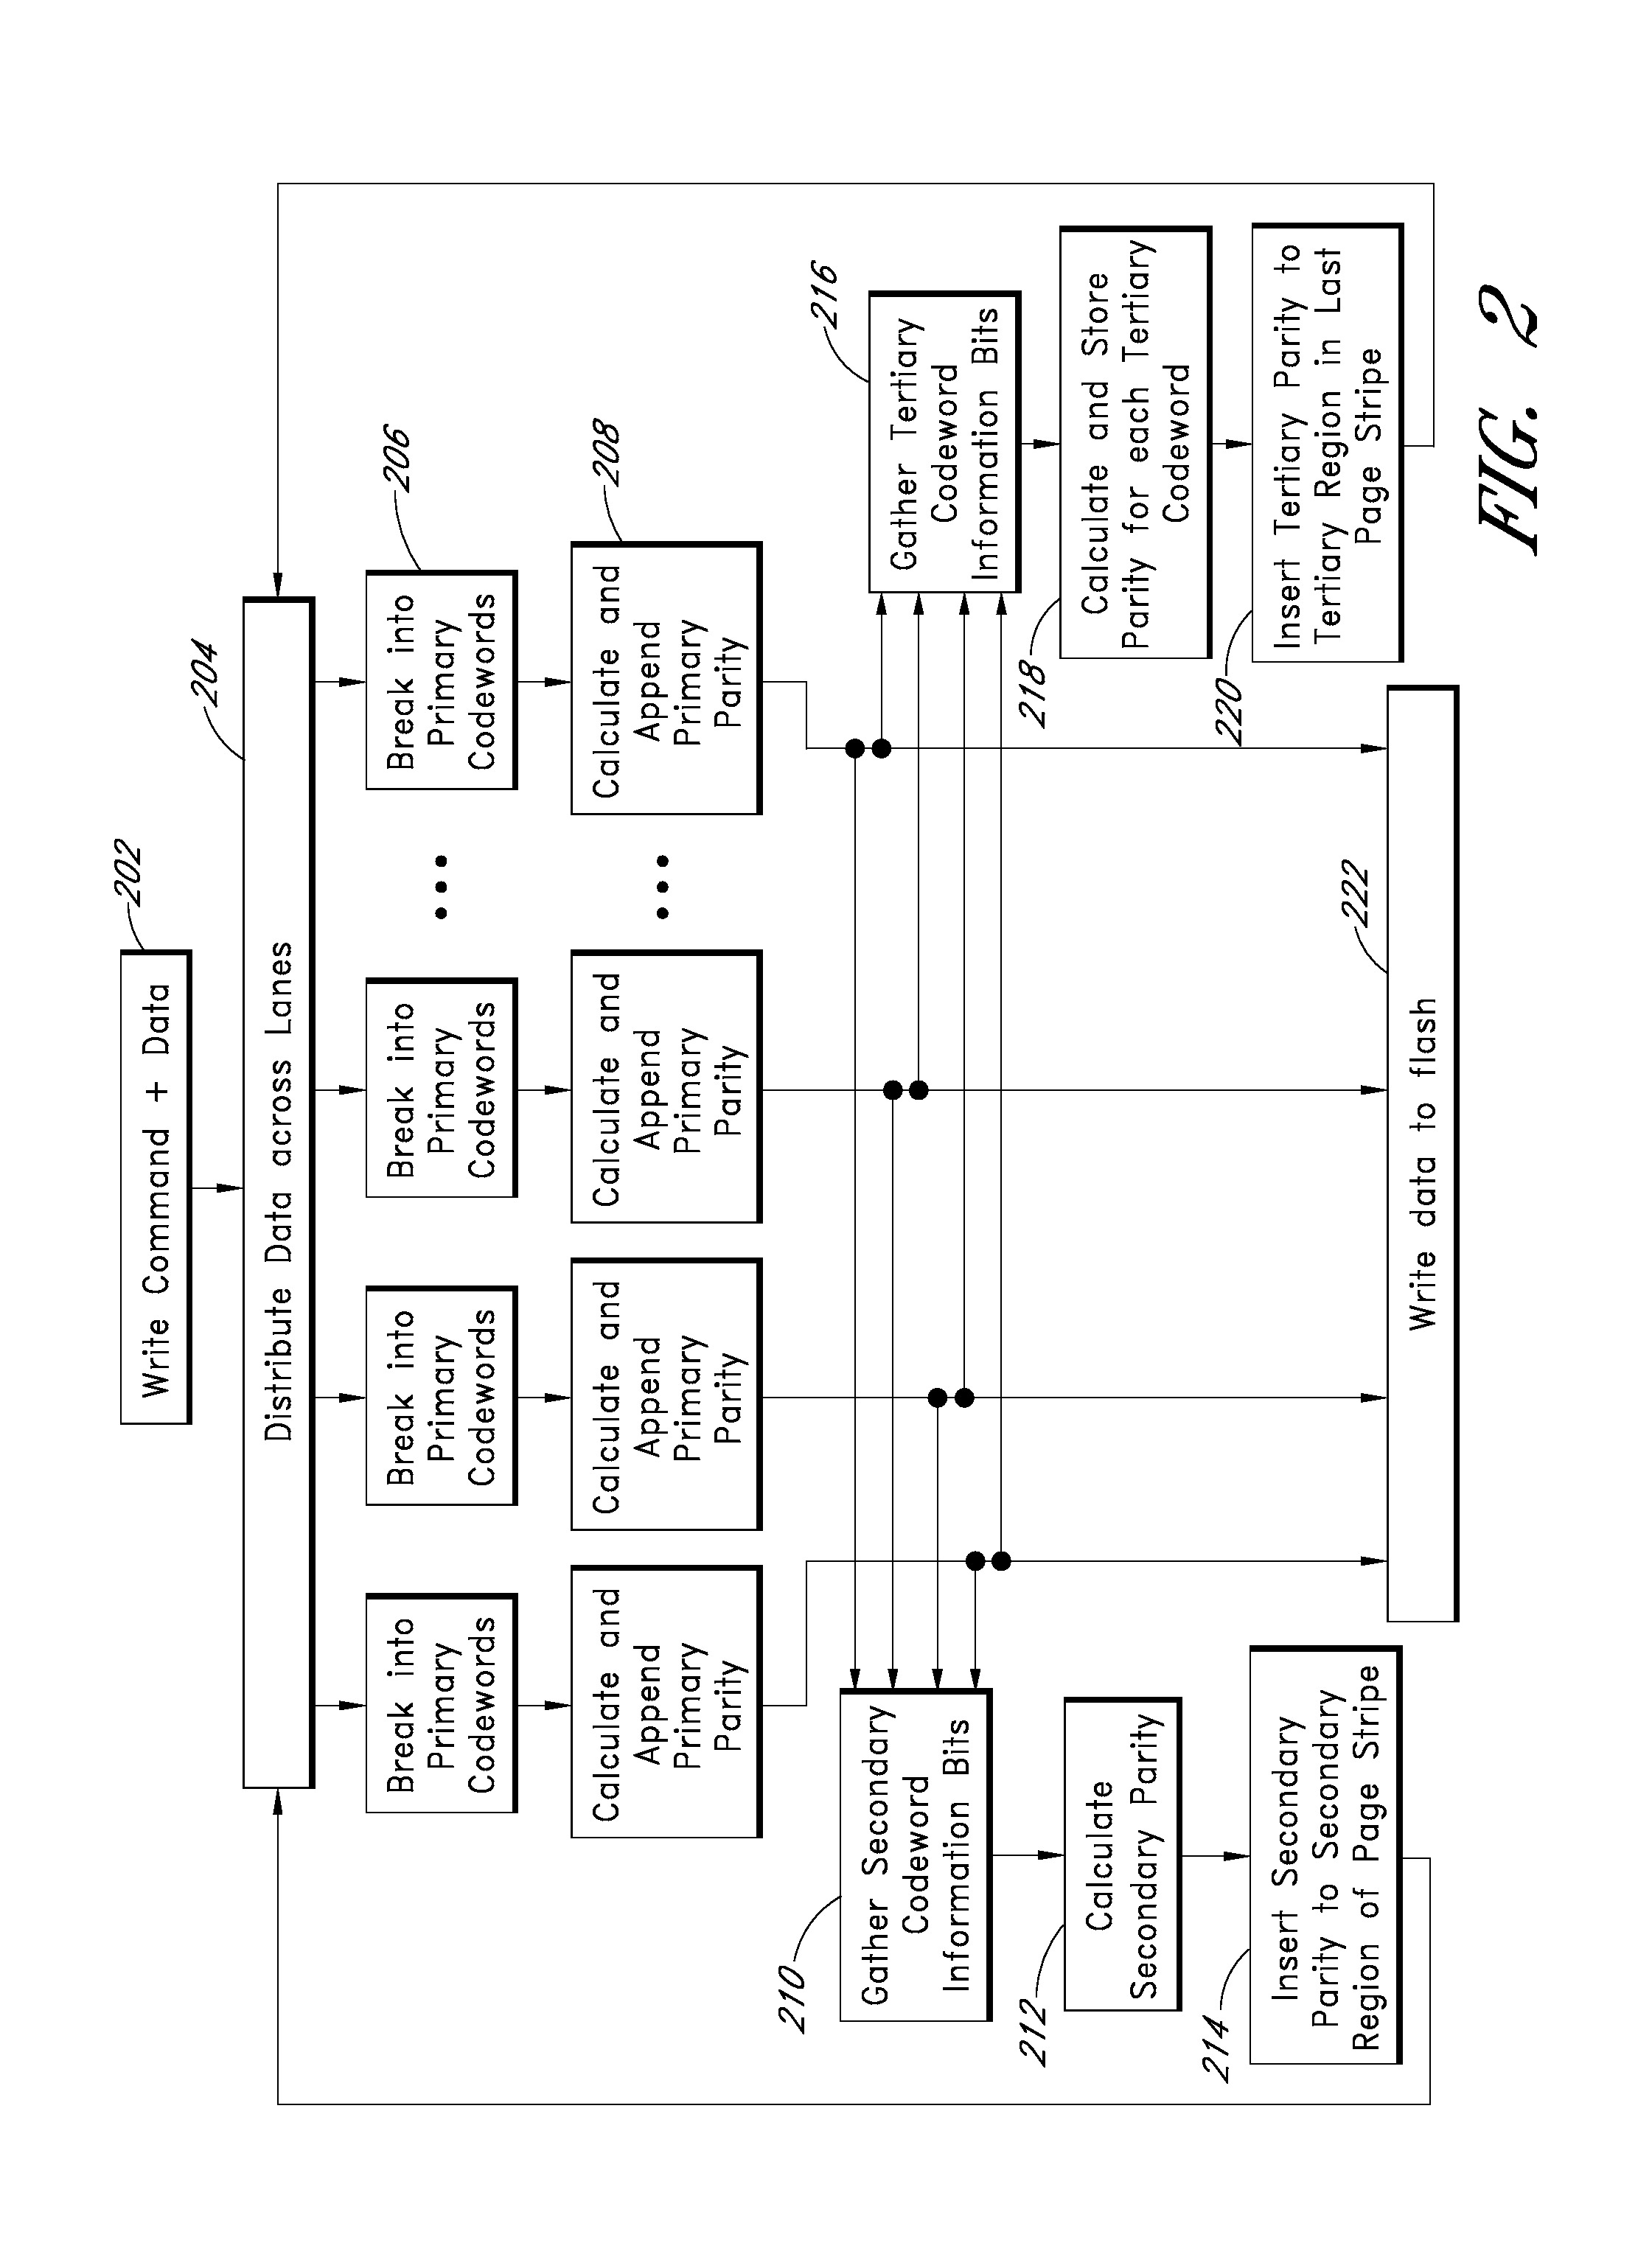 Systems and methods for recovering data from failed portions of a flash drive